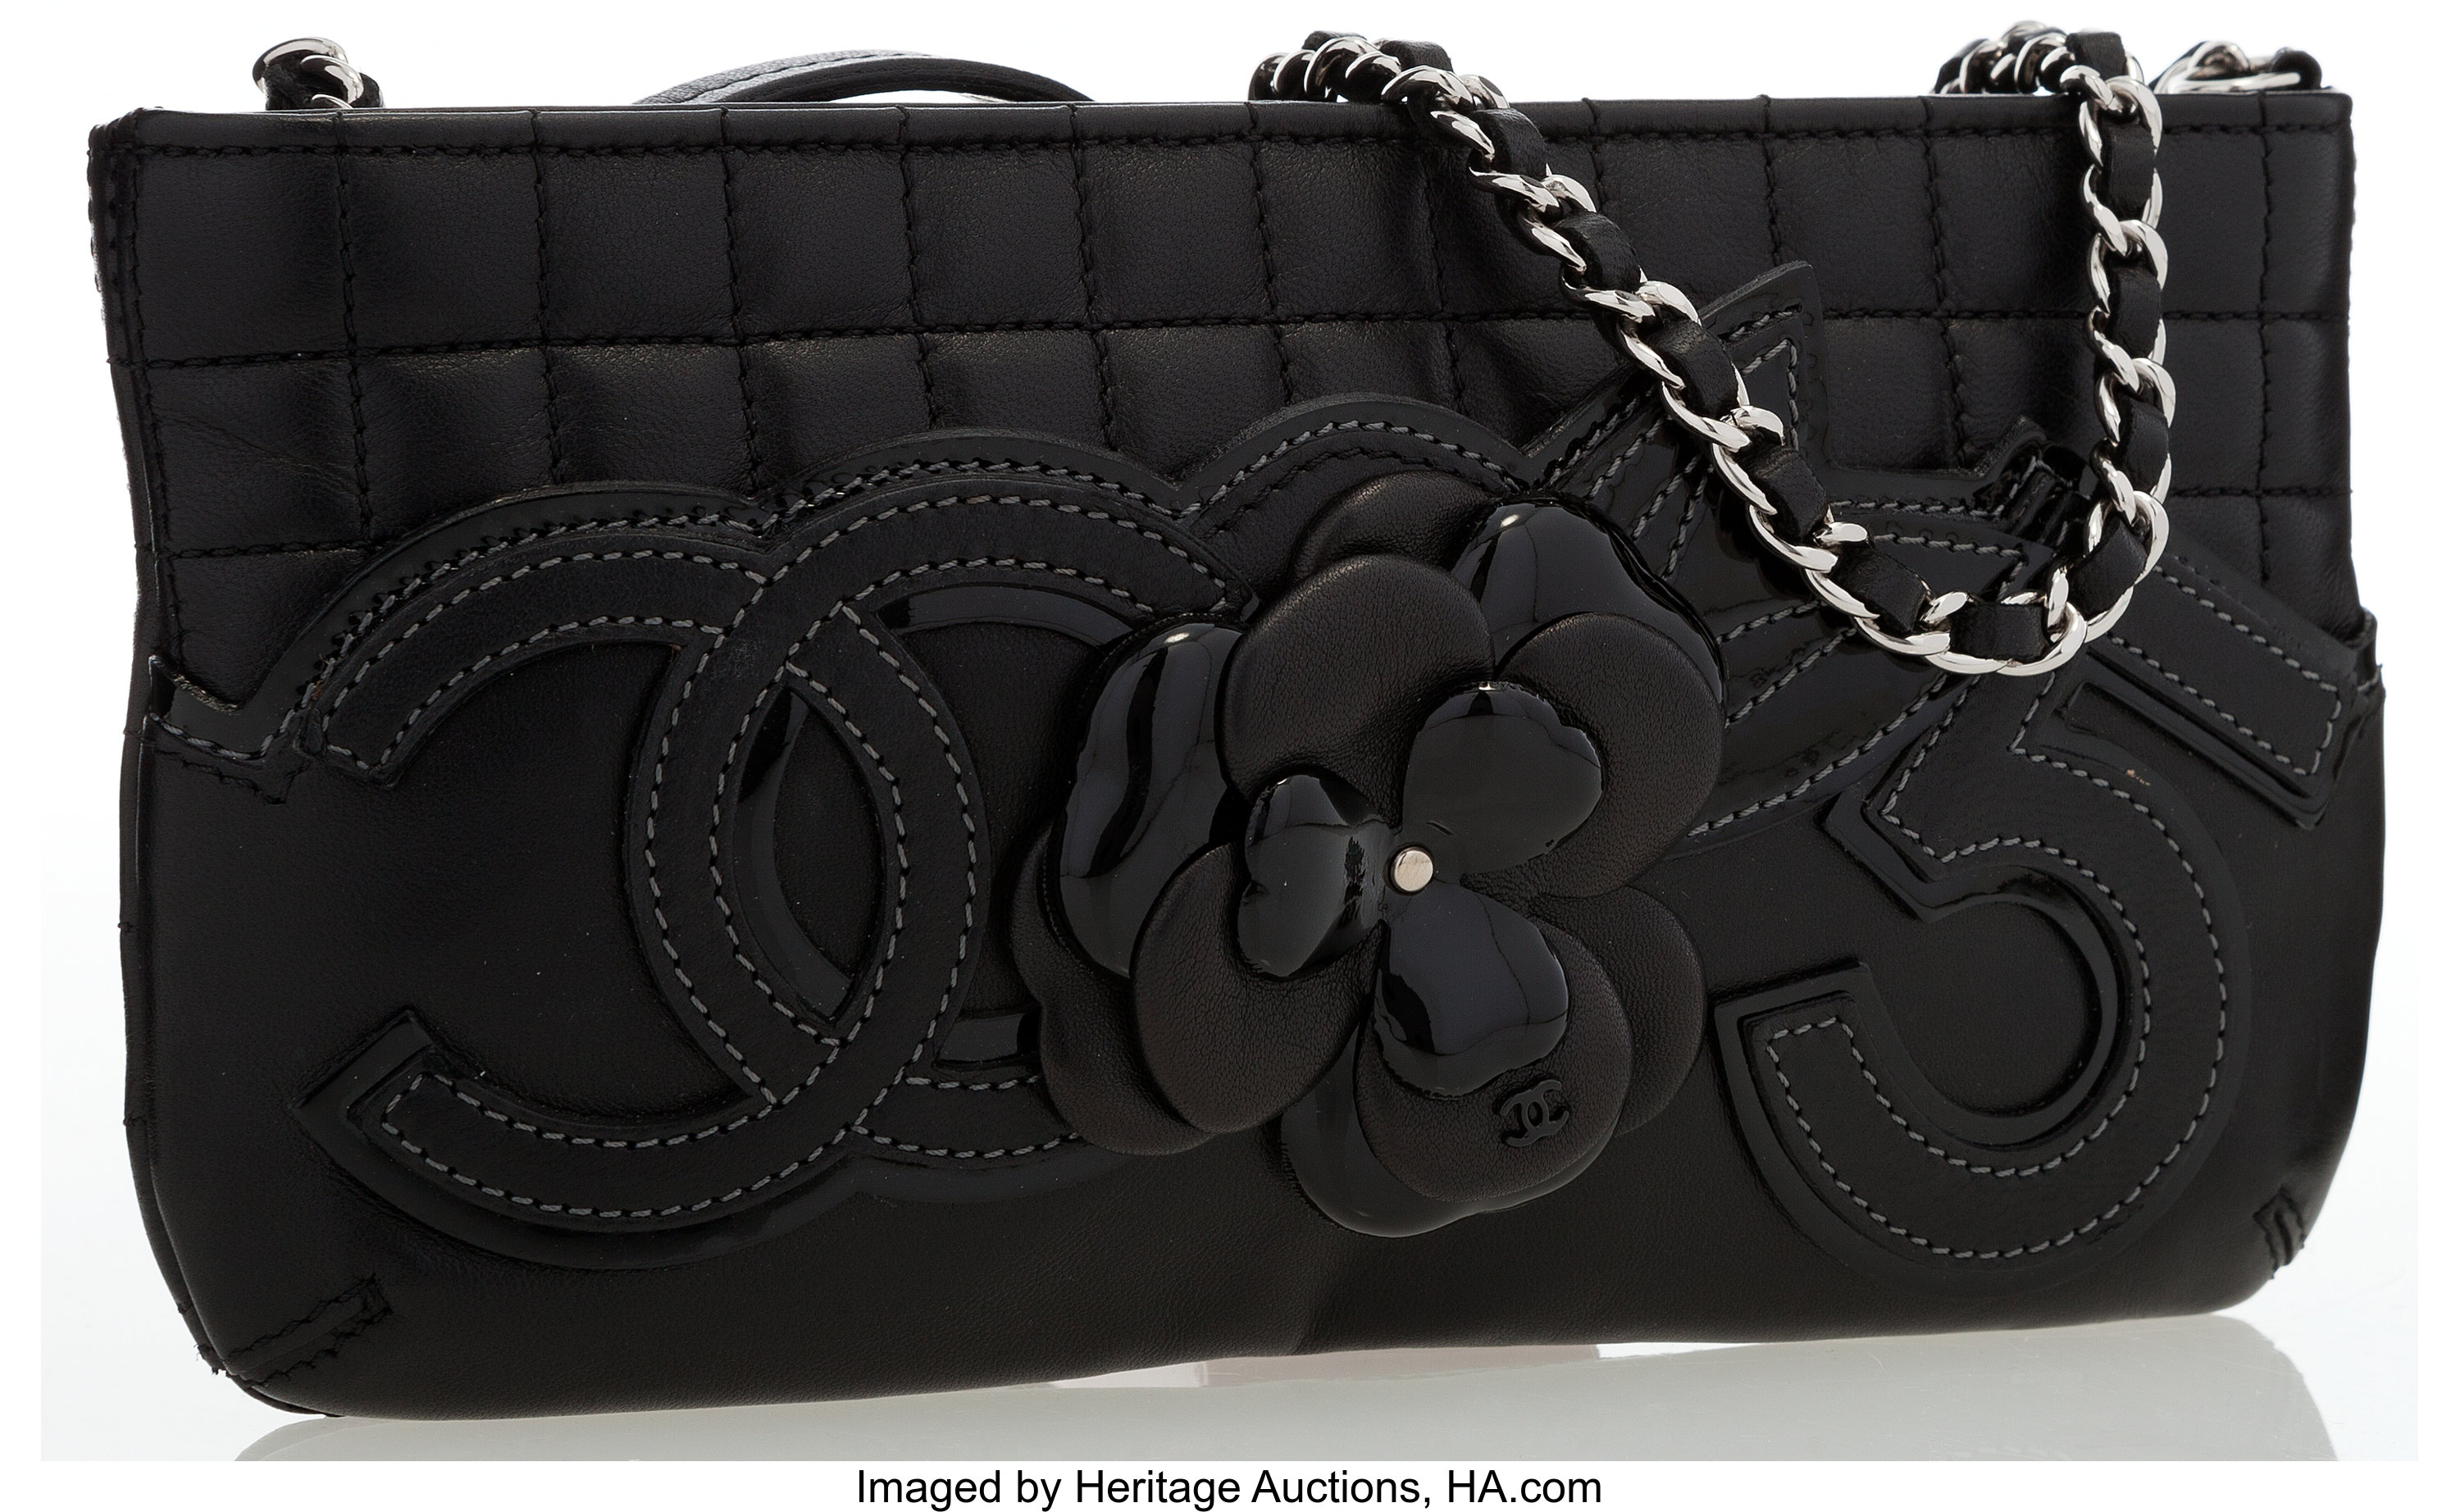 Chanel Black Quilted Lambskin Leather Camellia No. 5 Sac Pochette